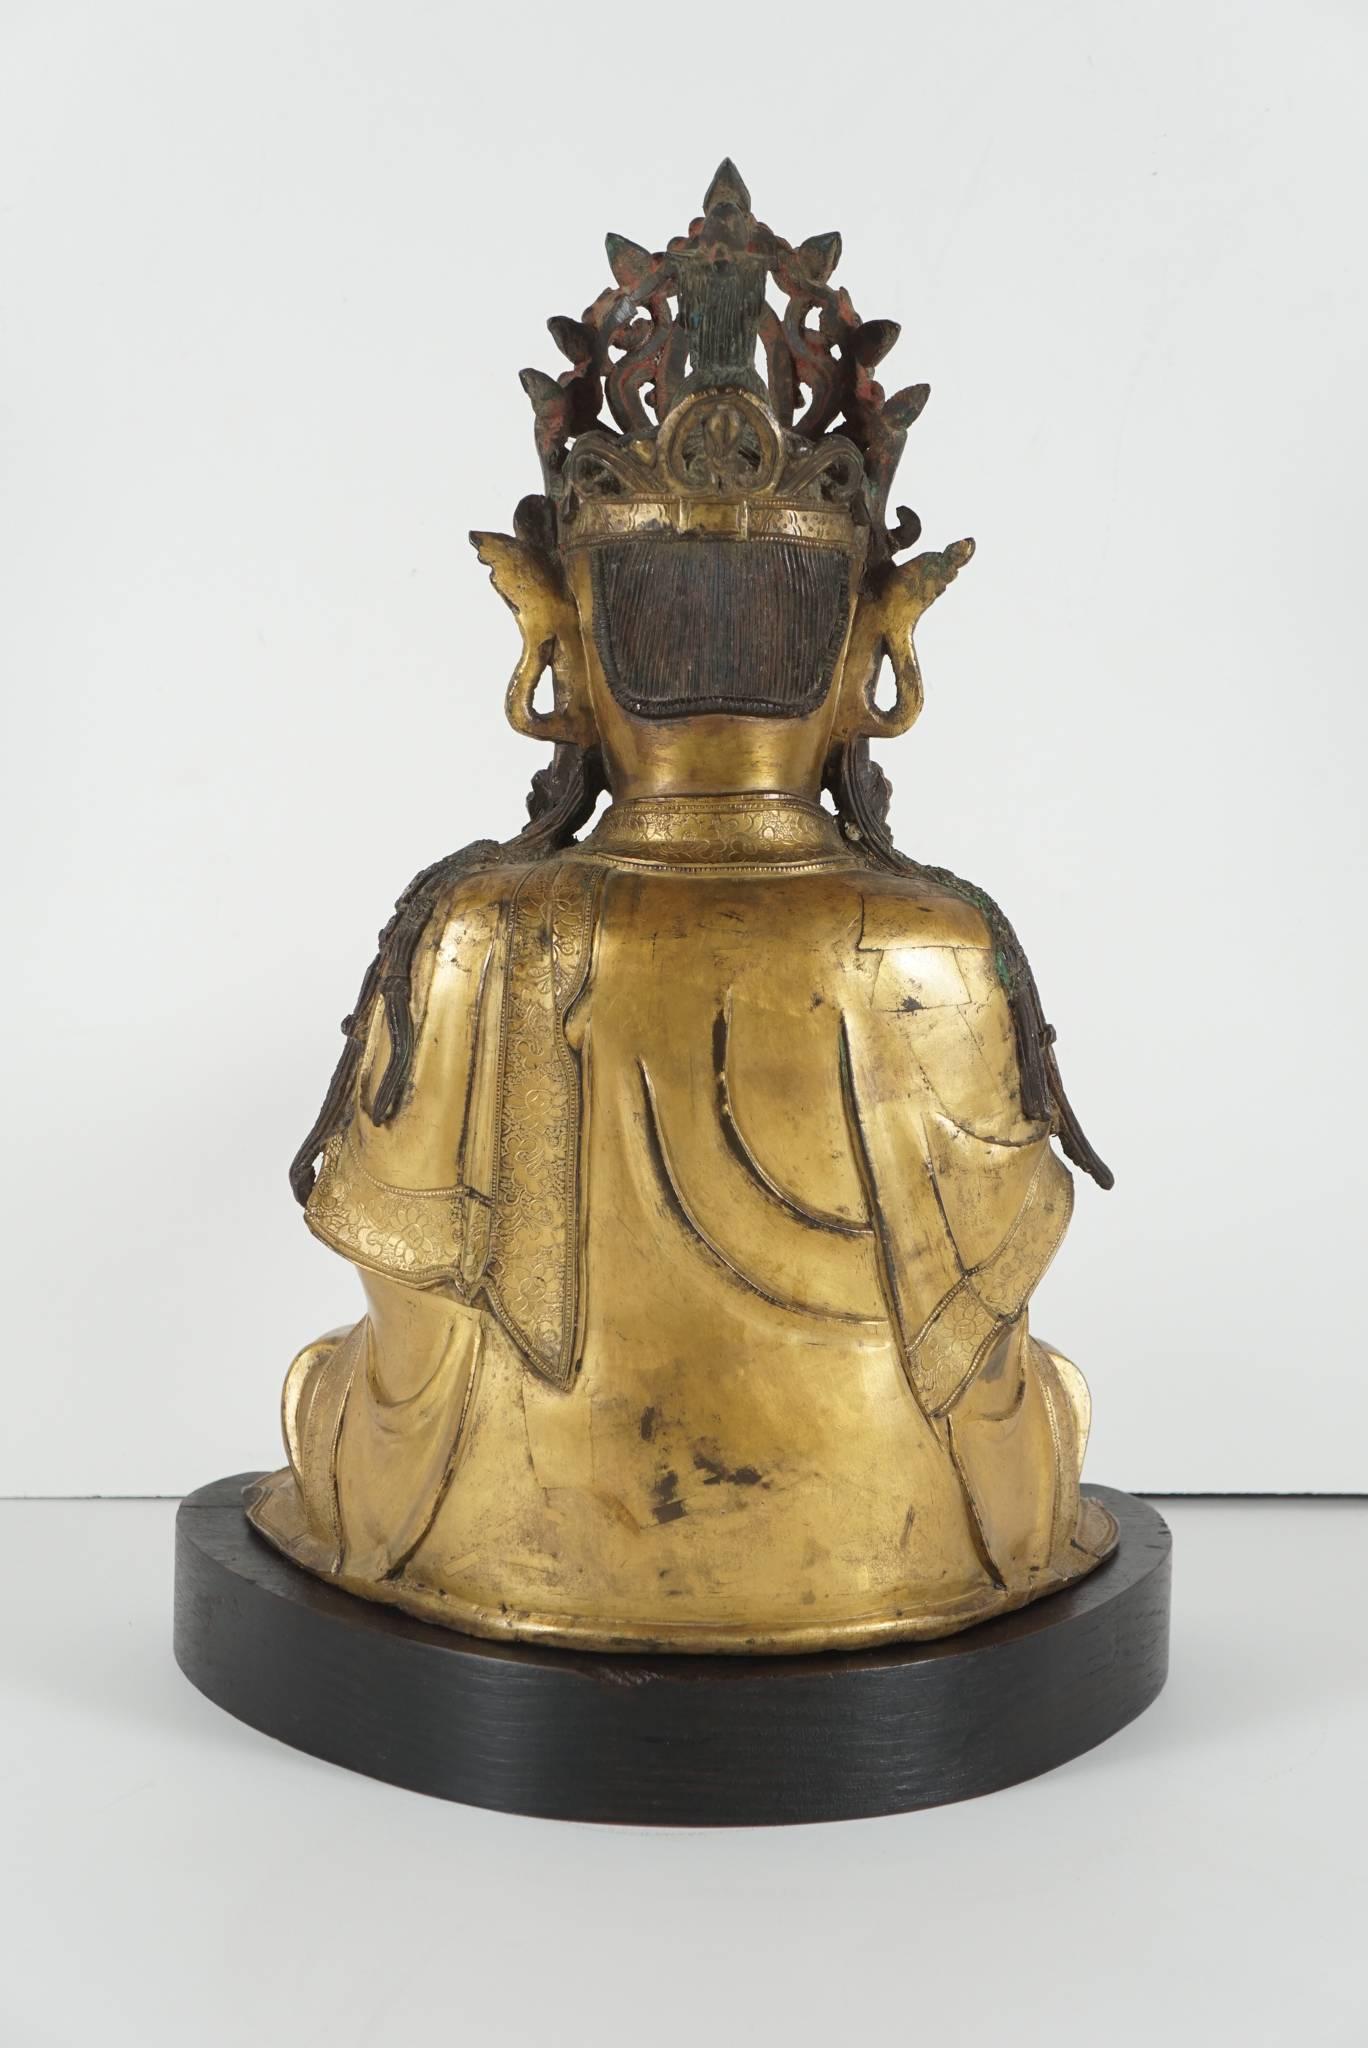 Cast Chinese Period Ming Dynasty Gilded Bronze Figure of Guanyin